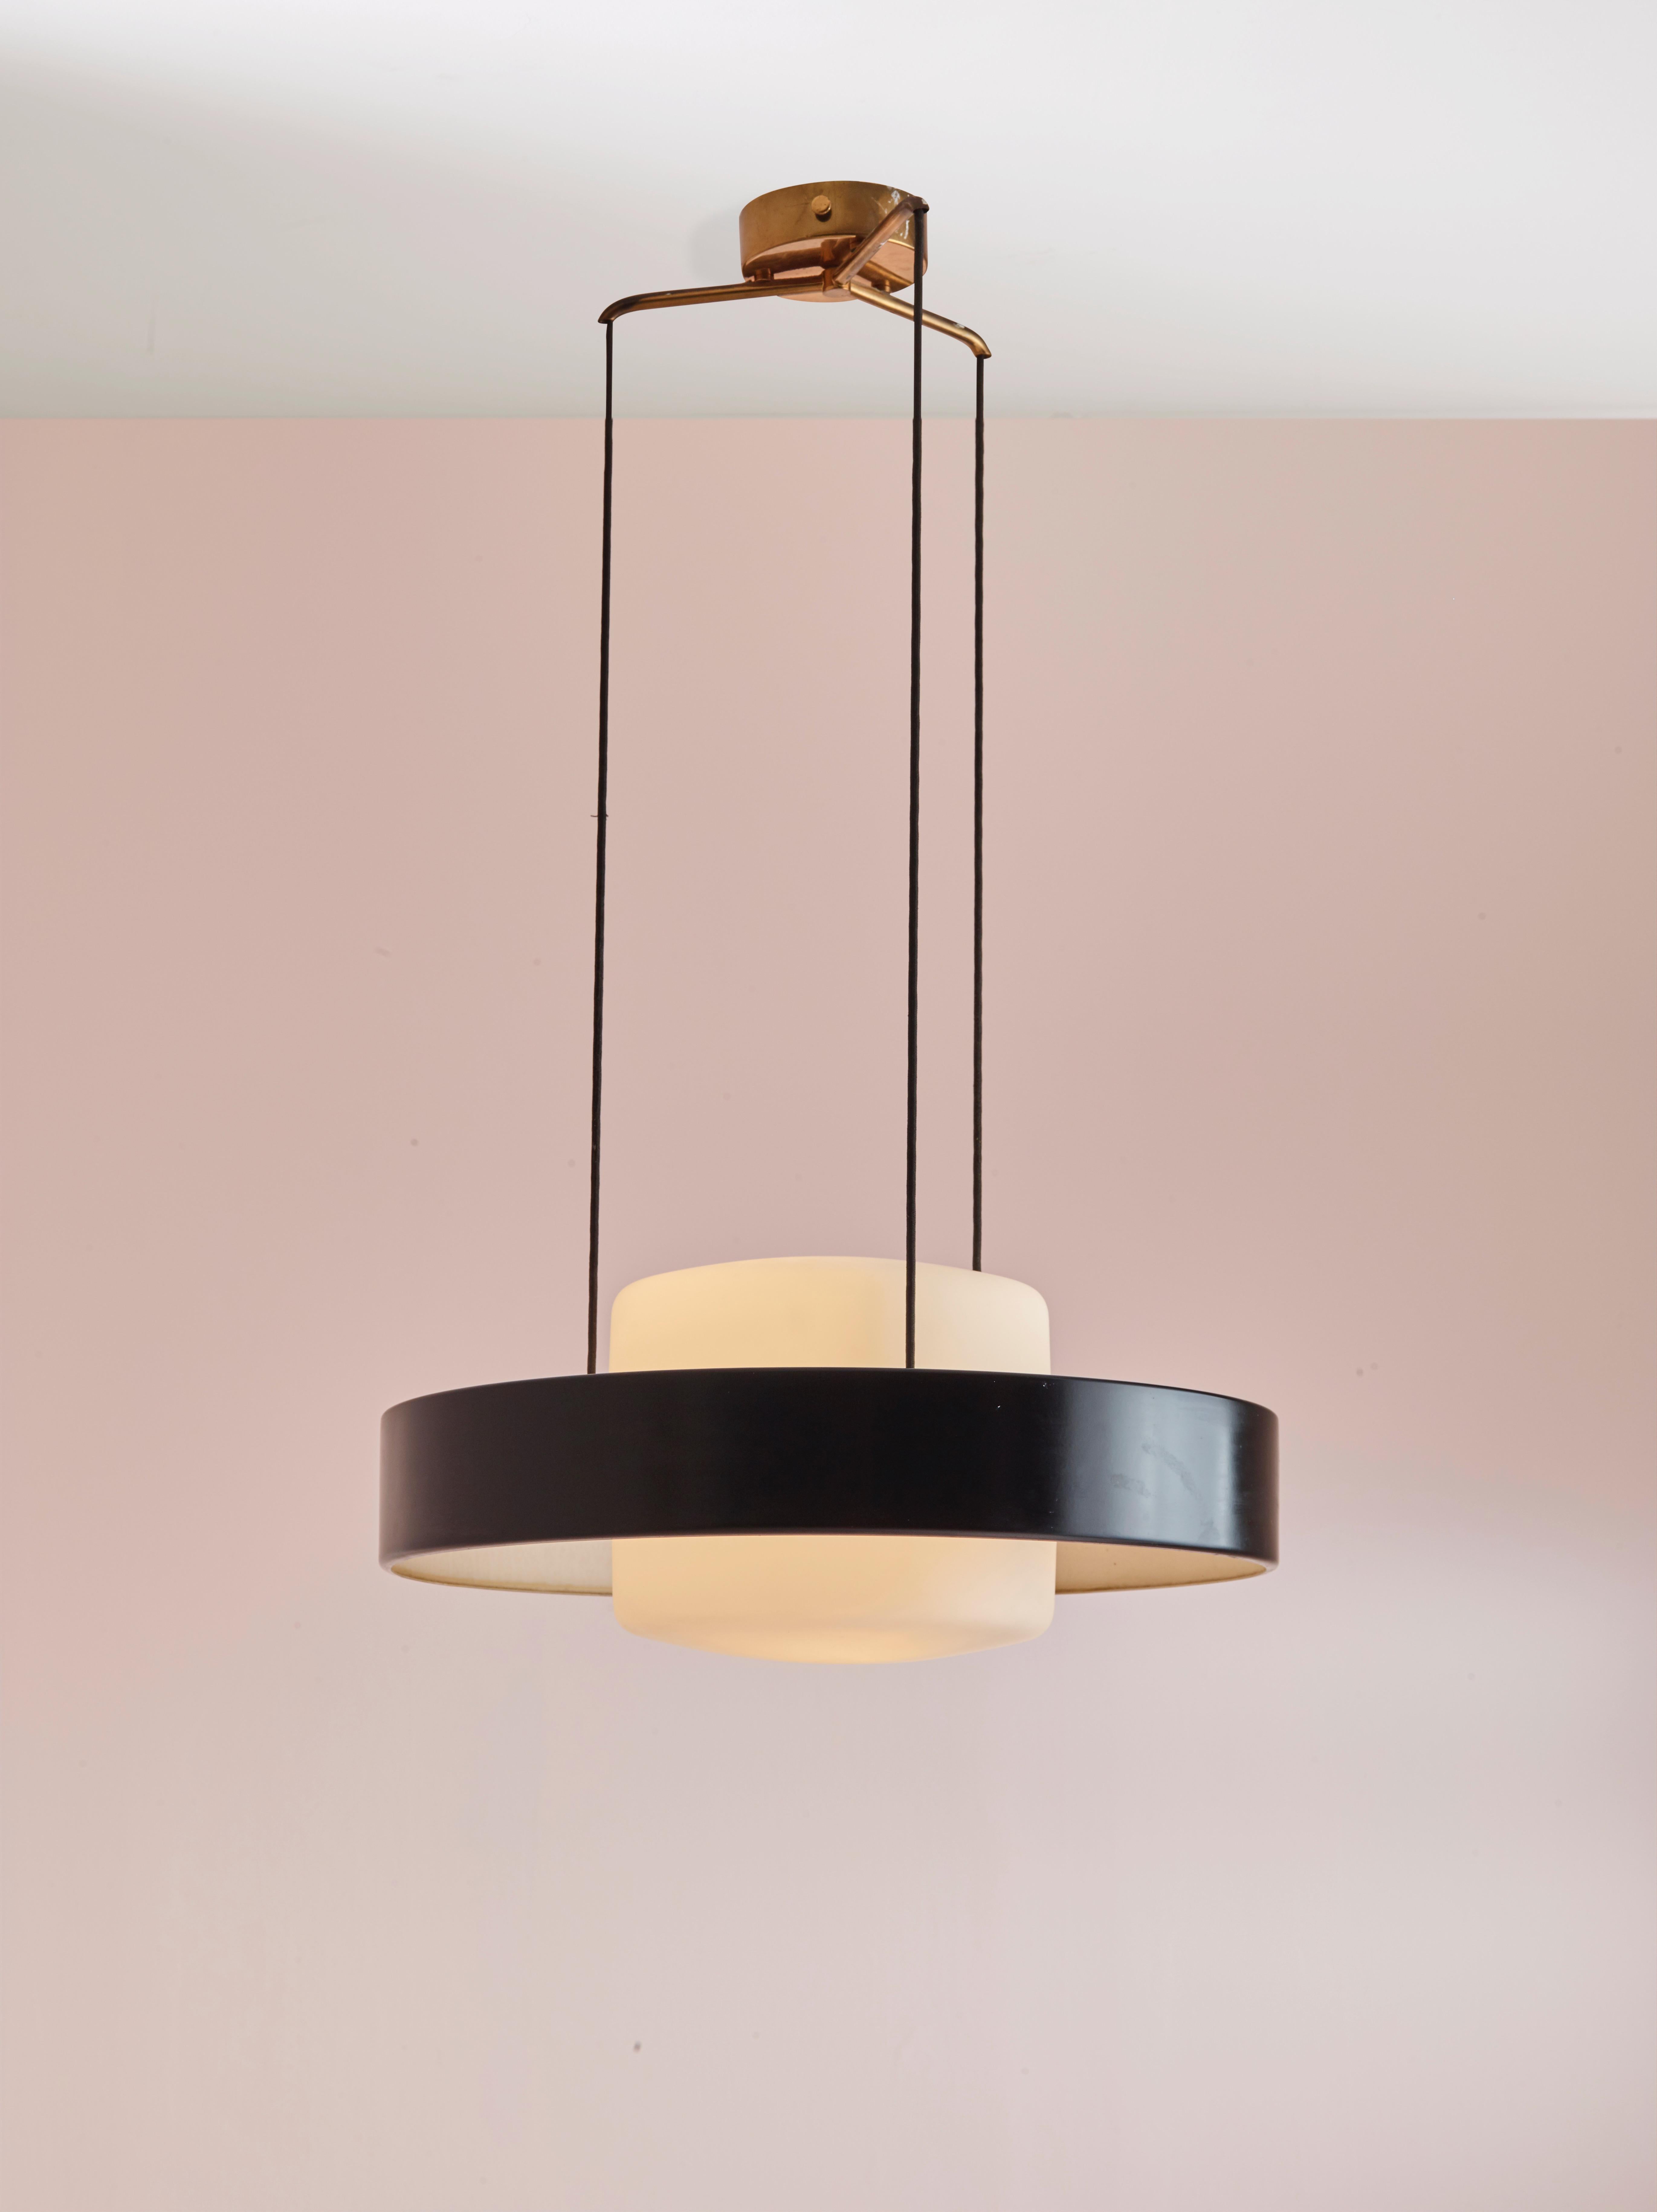 A rare 1158 suspension lamp with black lacquered aluminium, brass structure (canopy and hardware) and diffusers in opal glass. Manufactured by Stilnovo - Italy - during the 1950s, this model has been designed by Bruno Gatta.

This ceiling light is